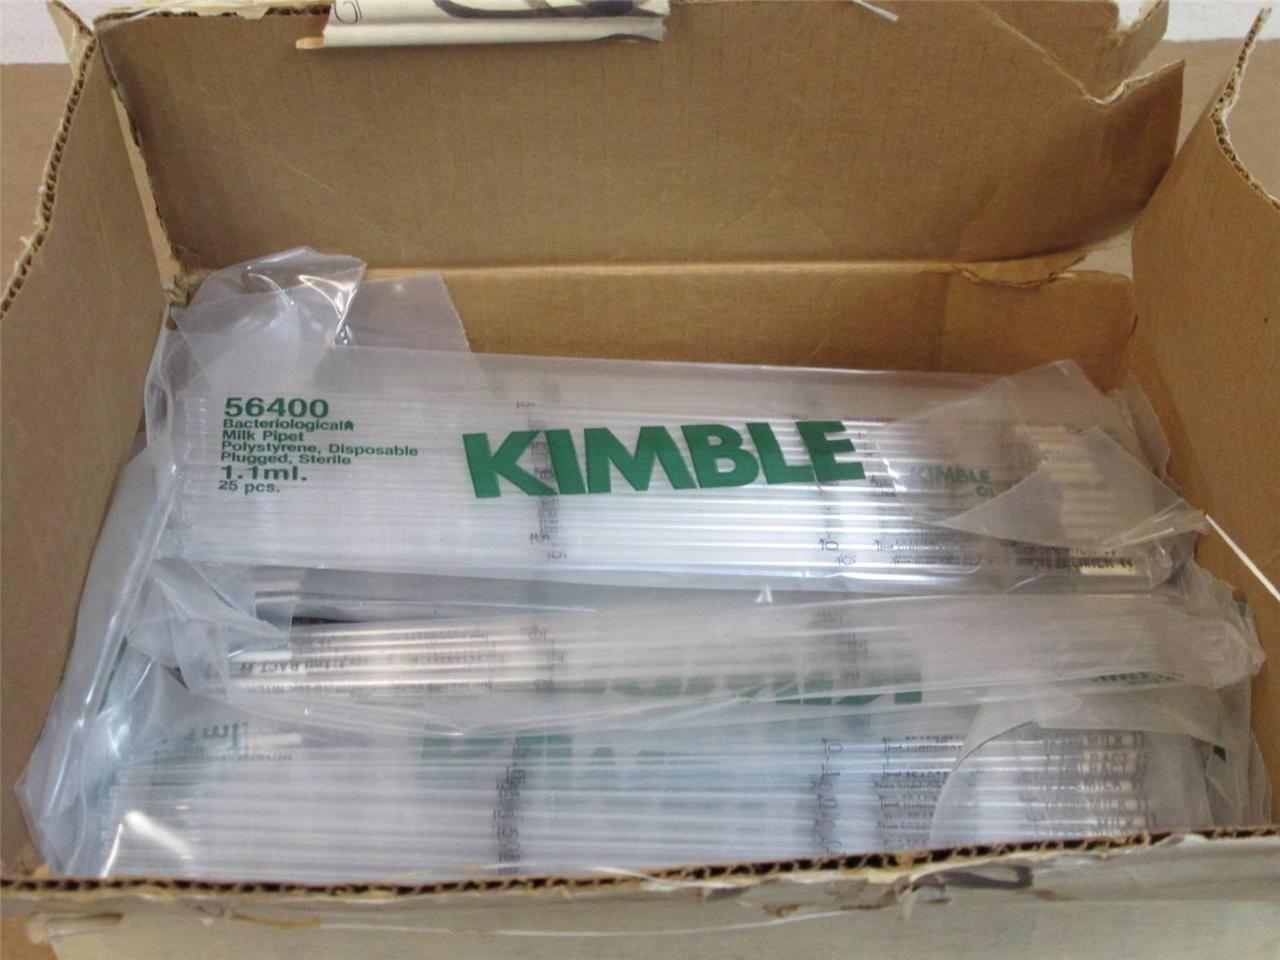 650 Kimble 53384-192  Model 56400 Disposable Sterile/Plugged Milk Pipets 1.1 mL - $144.33